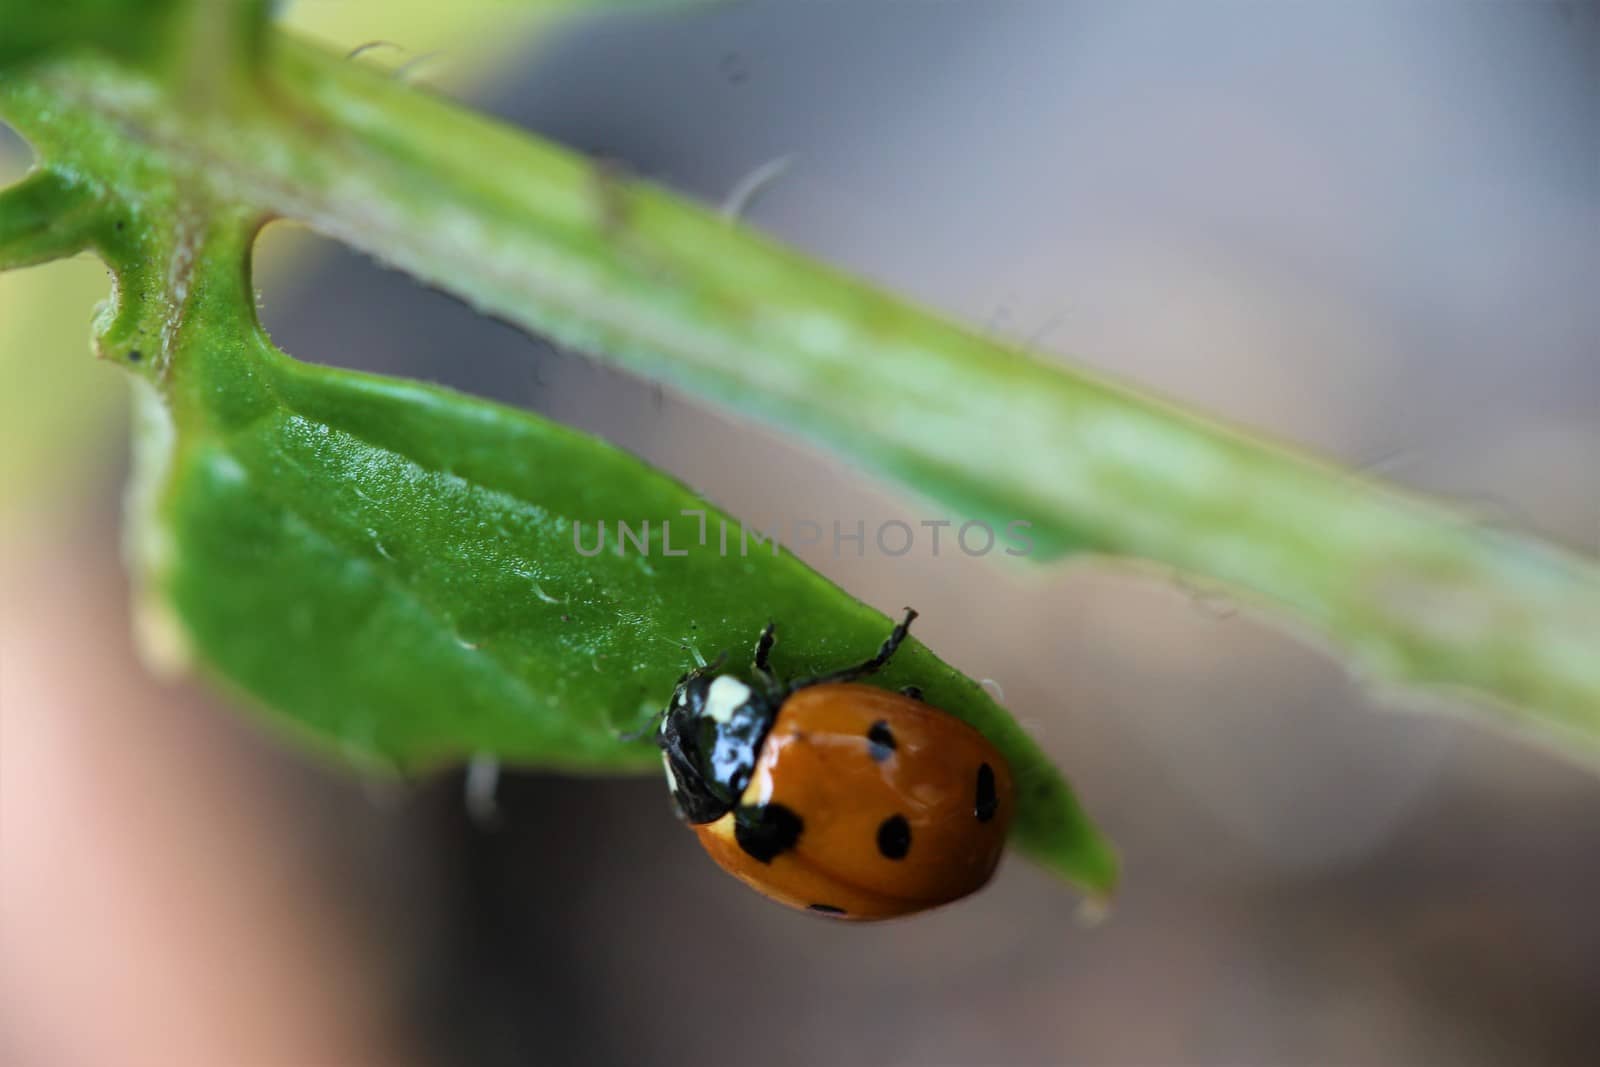 Ladybug as a close-up on a green leaf by Luise123